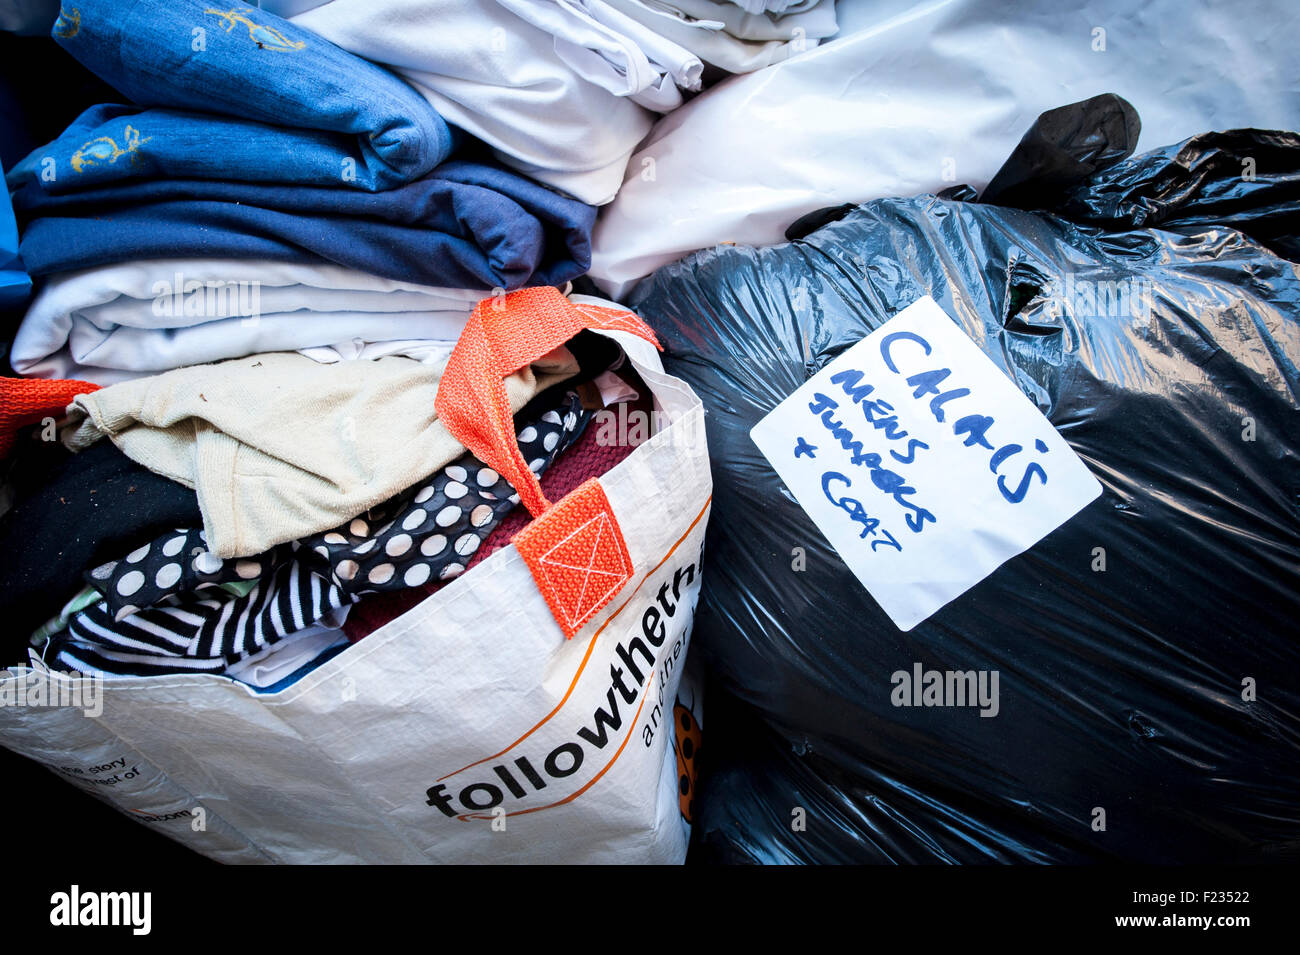 Exeter, UK. 10th Sep, 2015. Donated clothes, sorted, packed and labled during the Exeter Calais Solidarity collection for refugees living in 'The Jungle' refguee camp in Calais Credit:  Clive Chilvers/Alamy Live News Stock Photo